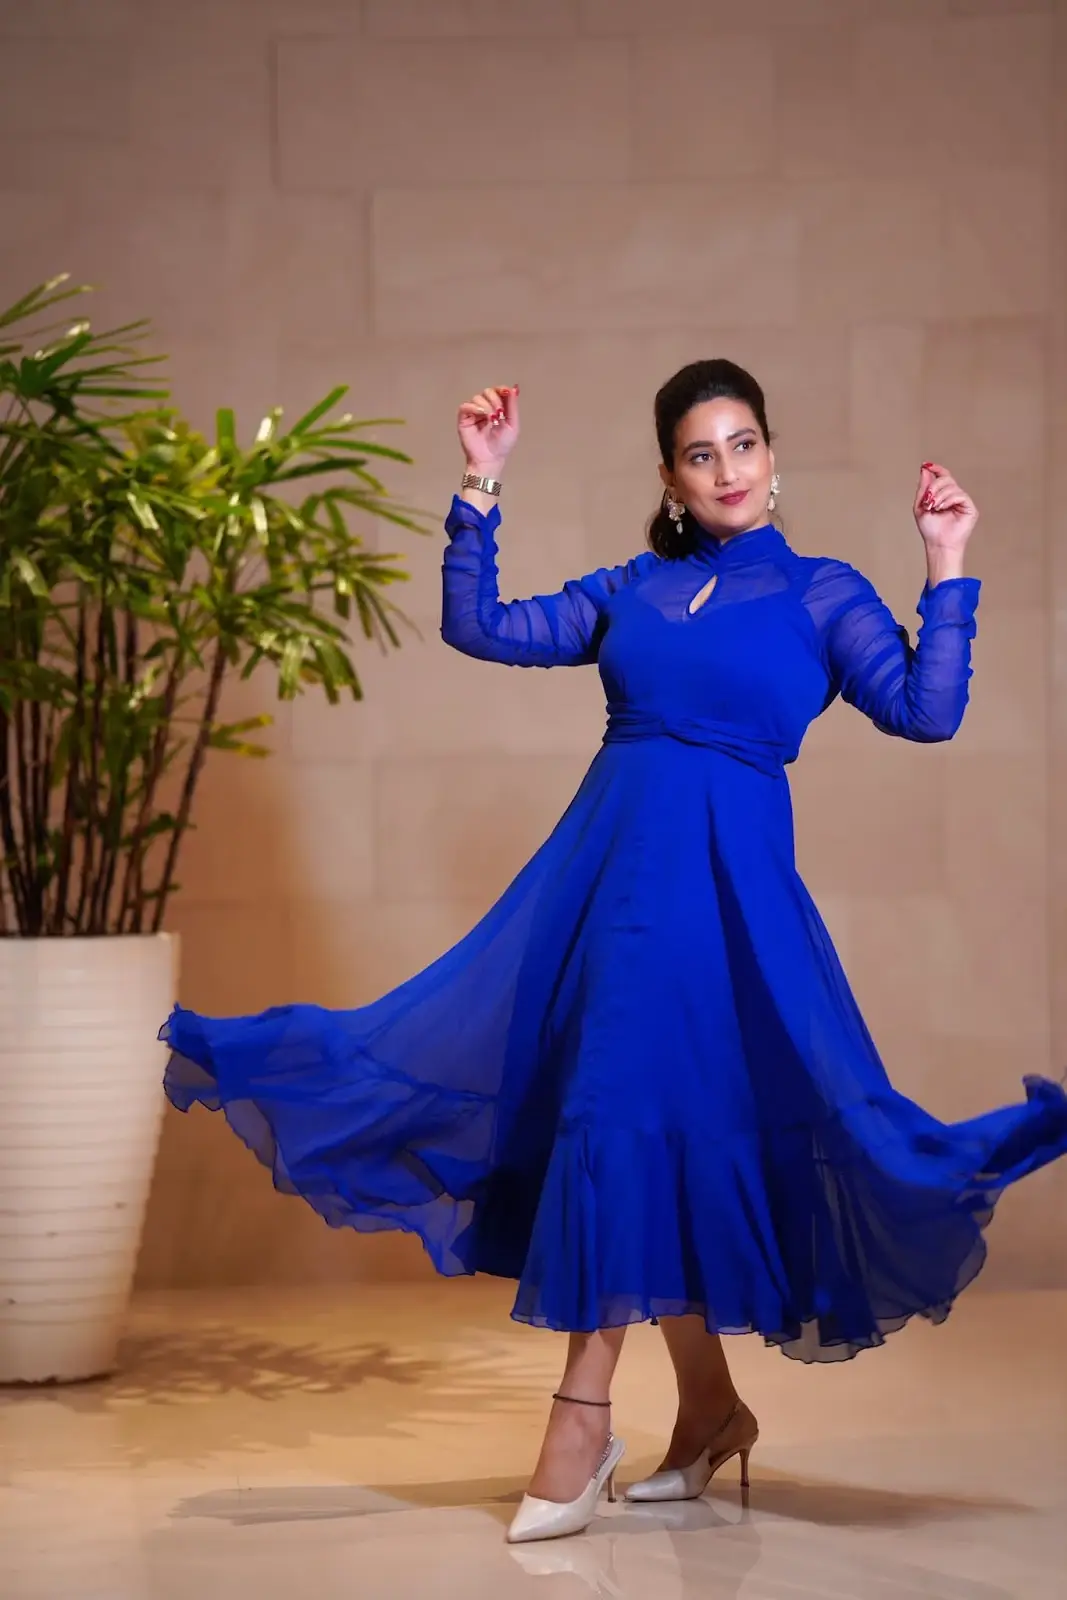 SOUTH TV ACTRESS RAMPALLI MANJUSHA IN BLUE GOWN 6